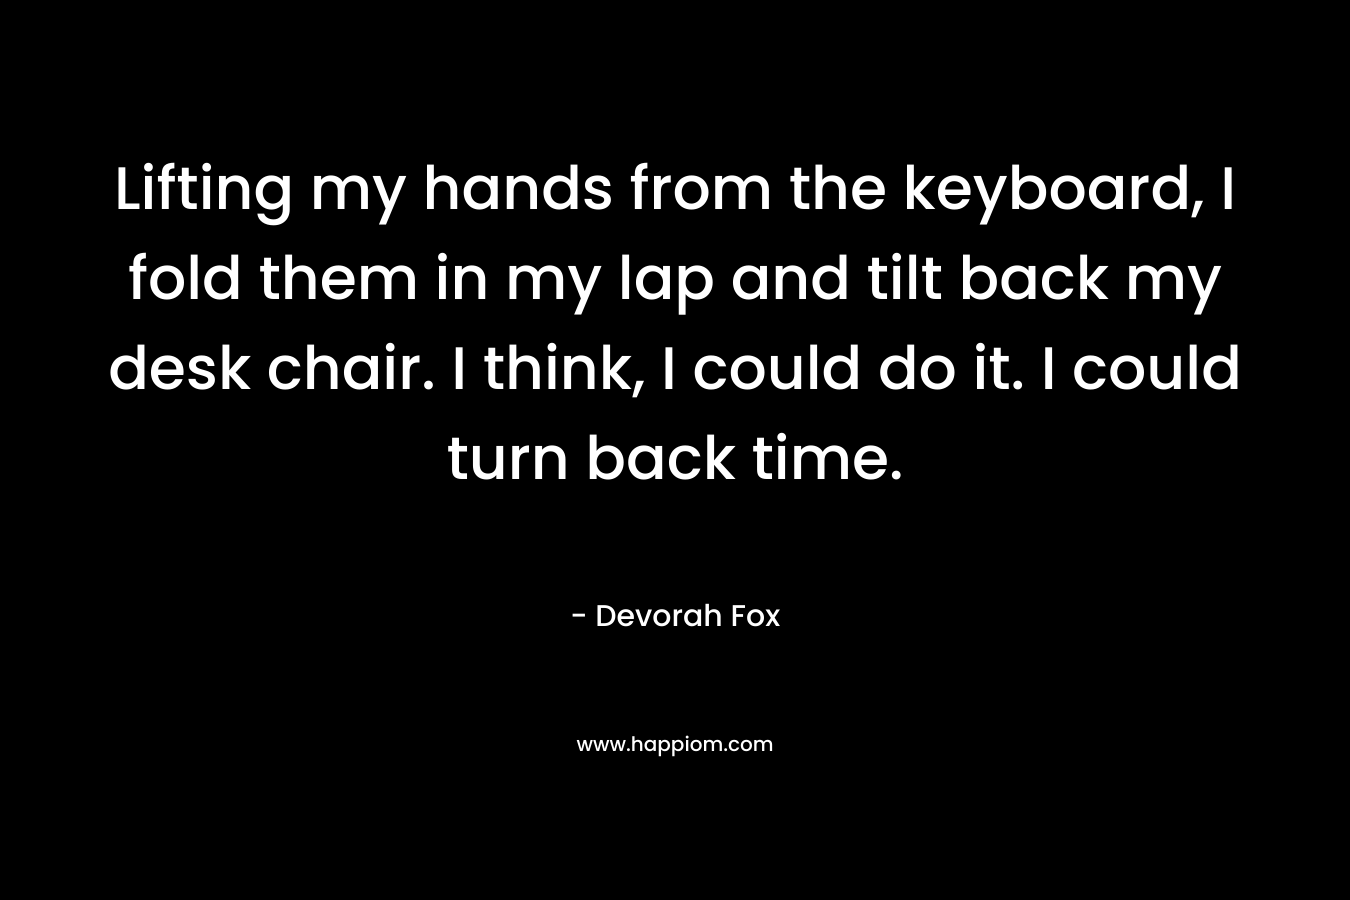 Lifting my hands from the keyboard, I fold them in my lap and tilt back my desk chair. I think, I could do it. I could turn back time. – Devorah Fox